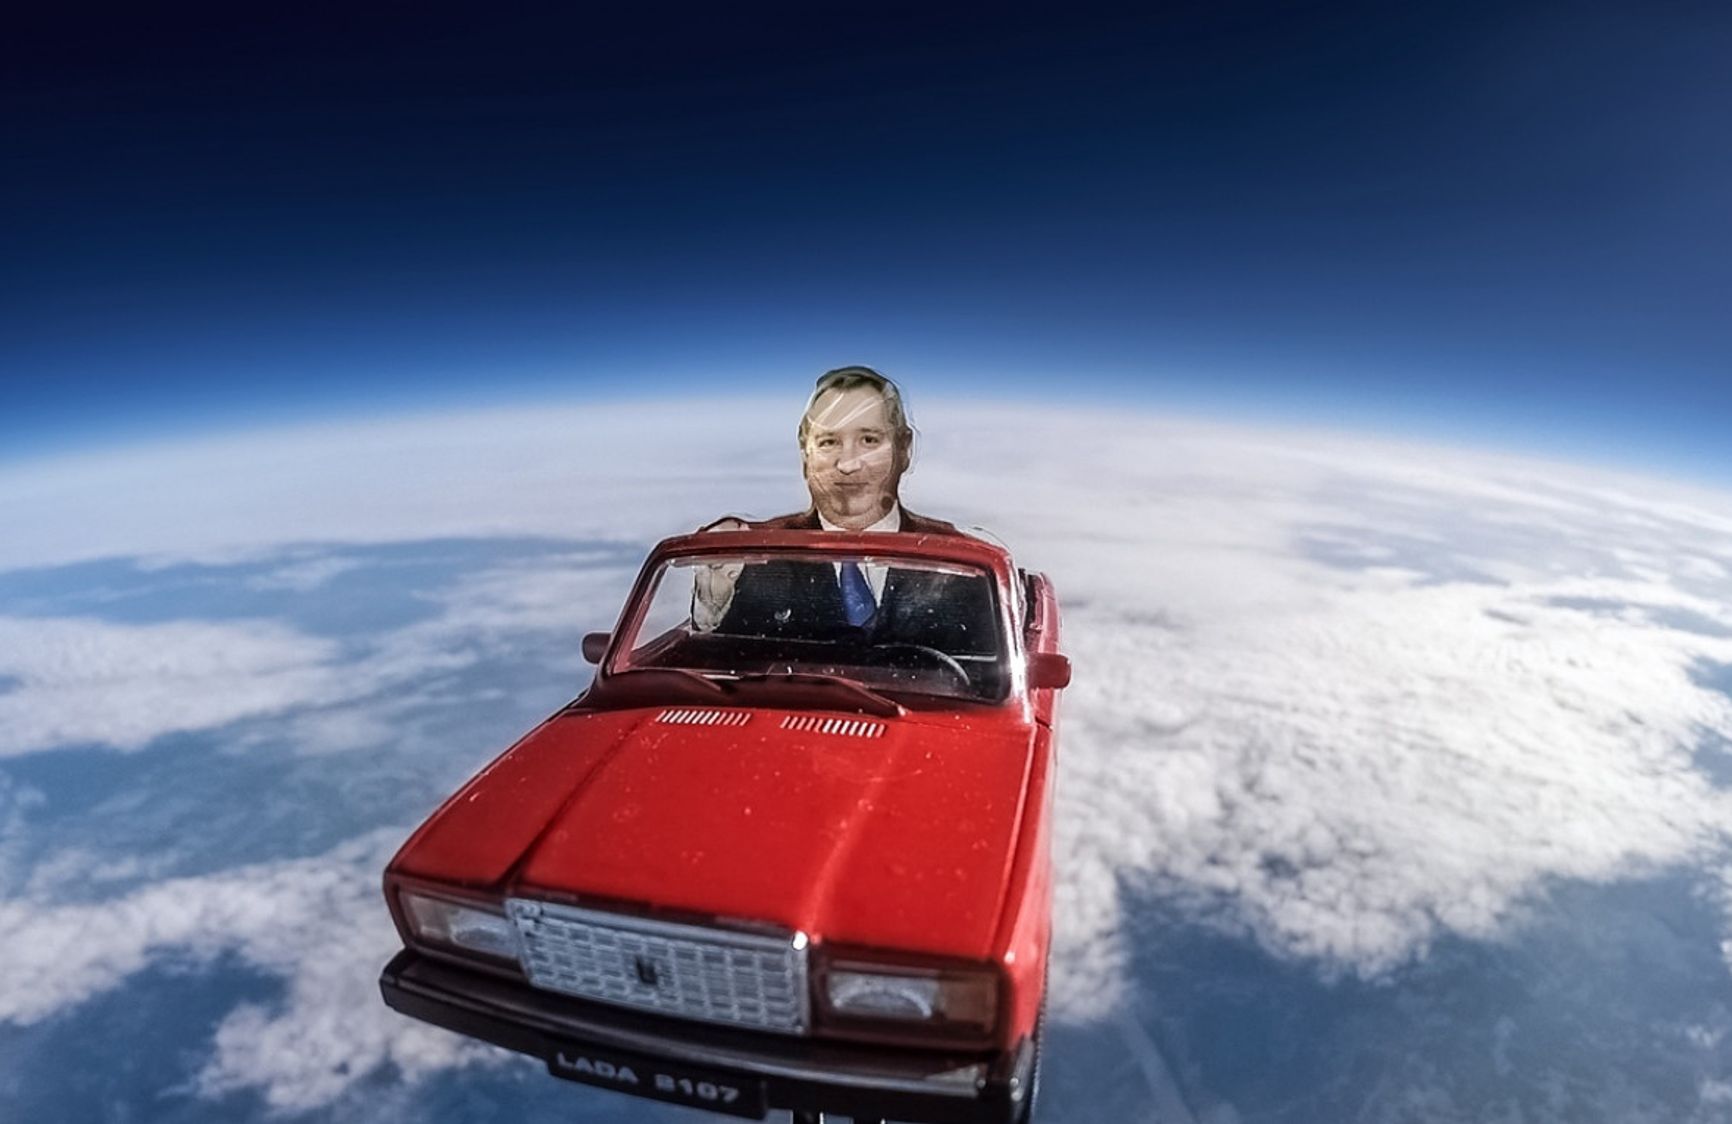 In 2019 Russian scientists sent Dmitry Rogozin’s eerie effigy into the atmosphere behind the wheel of a bright red Zhiguli toy car